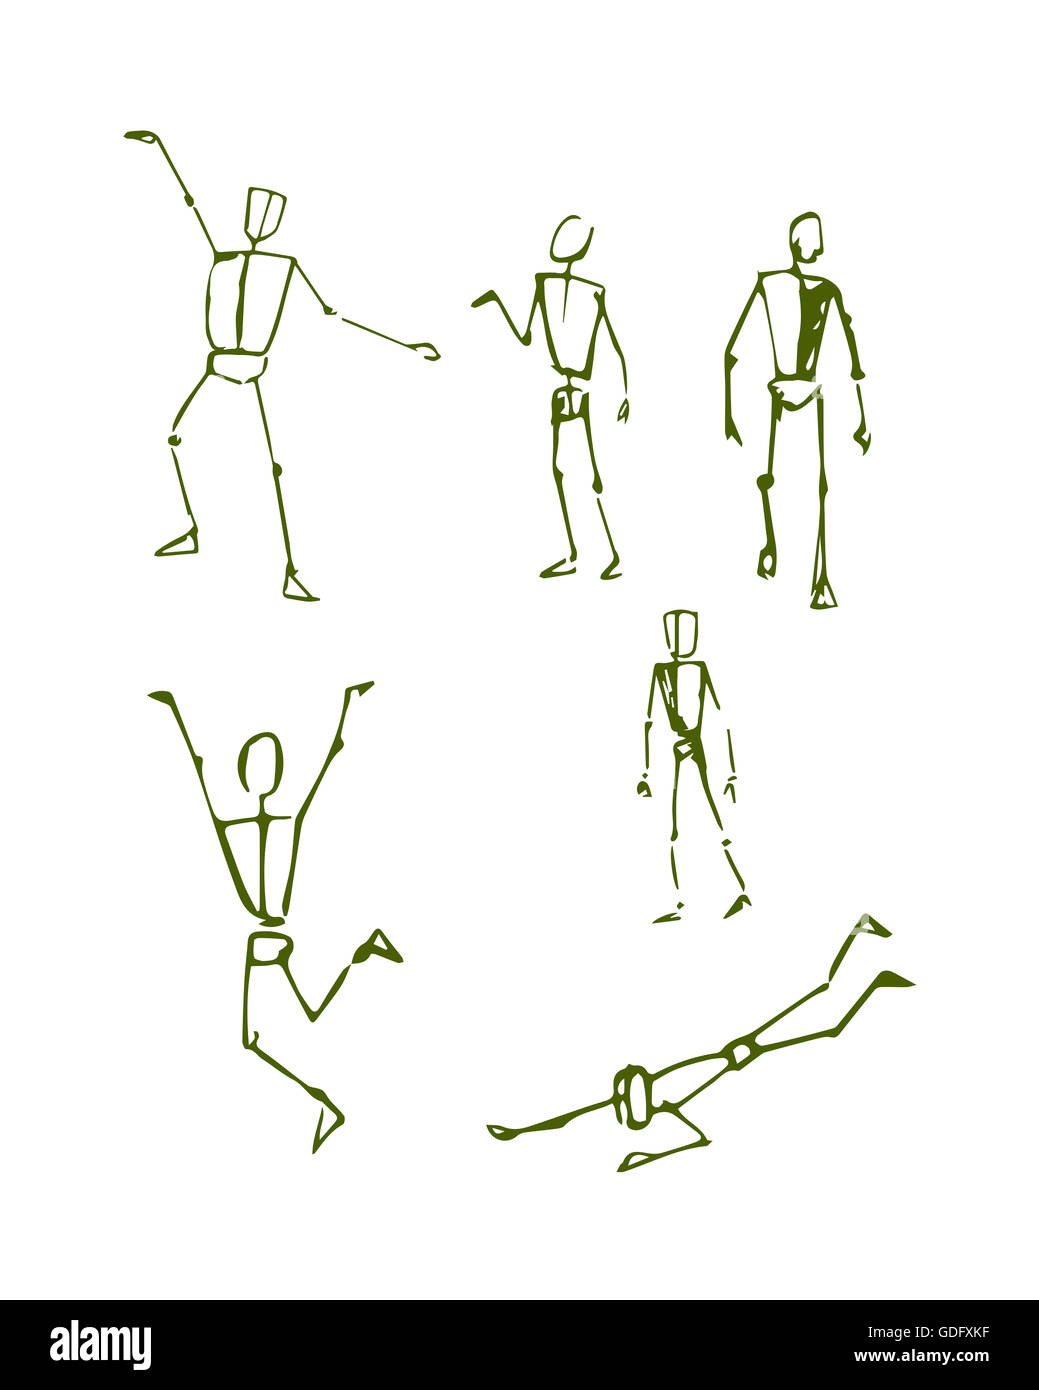 Hand drawn illustration or drawing of different men human body positions in a sketch style Stock Photo